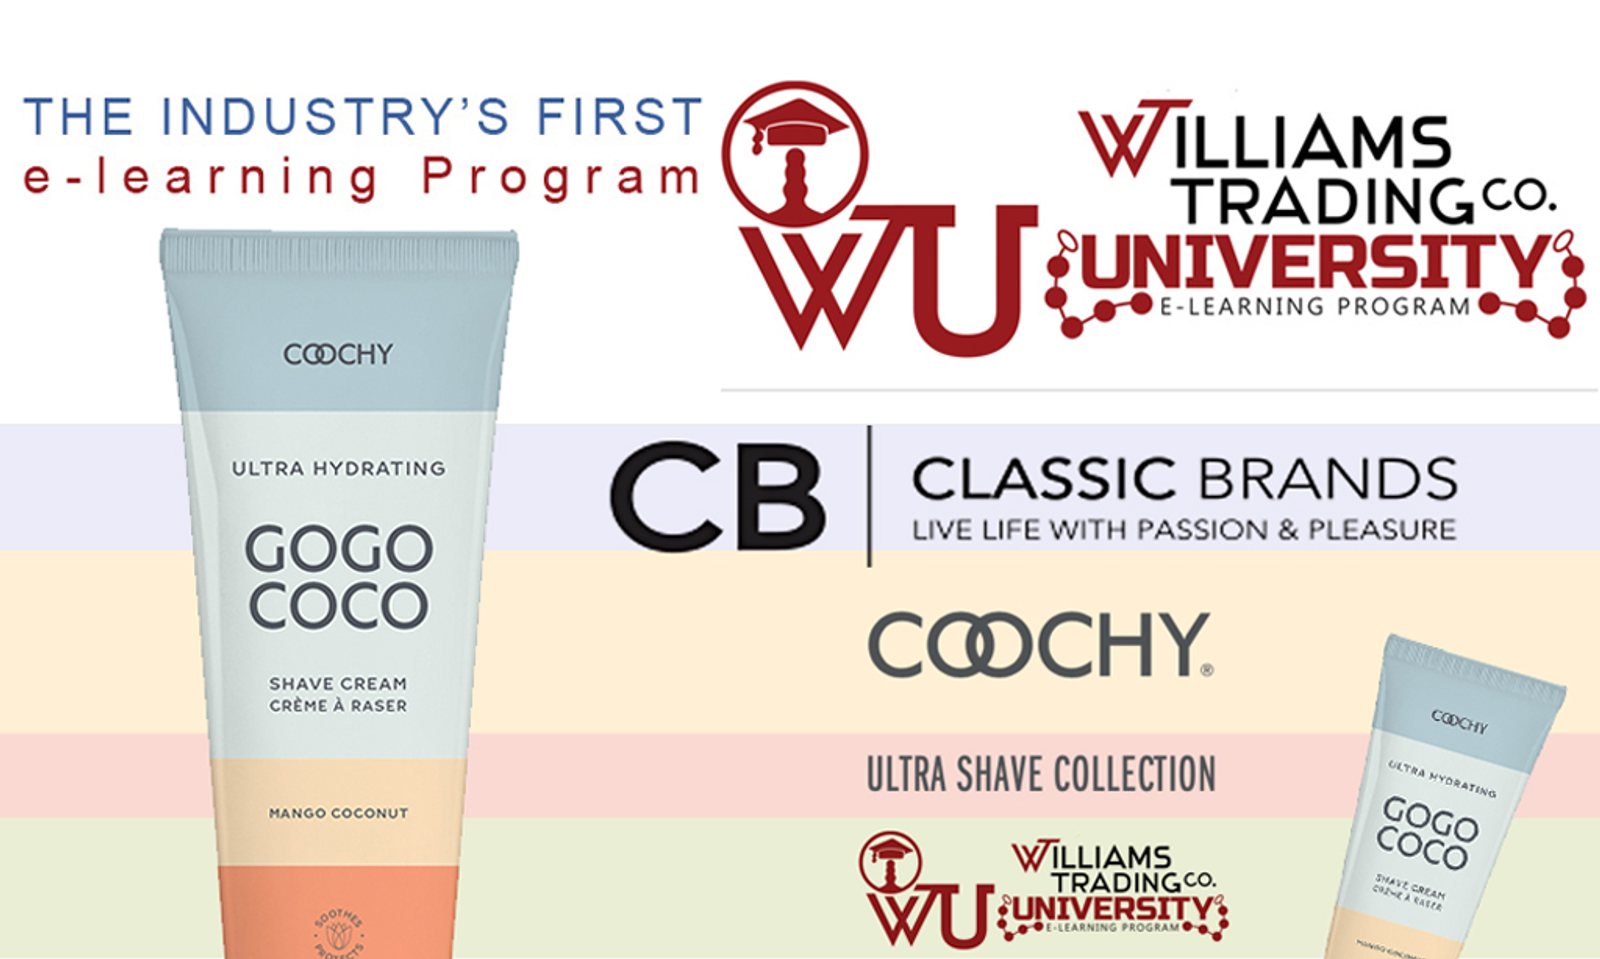 Coochy Ultra Shave Collection Is Subject of New WTU Course